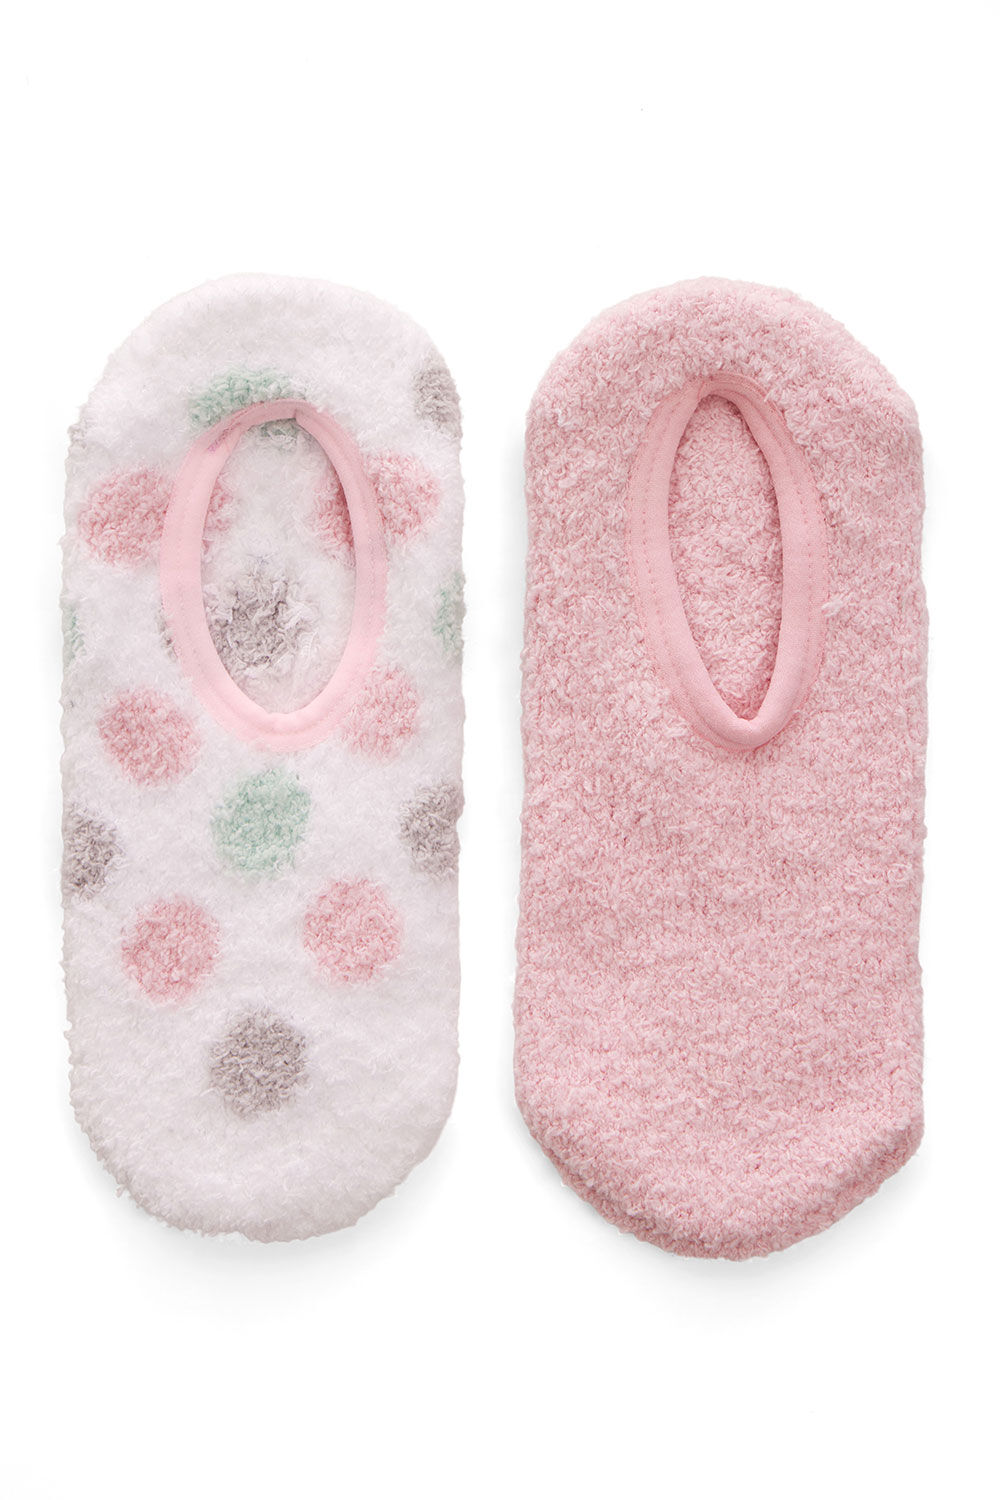 Bonmarche 2 Pack Pink and Spot Cosy Socks, Size: One Size